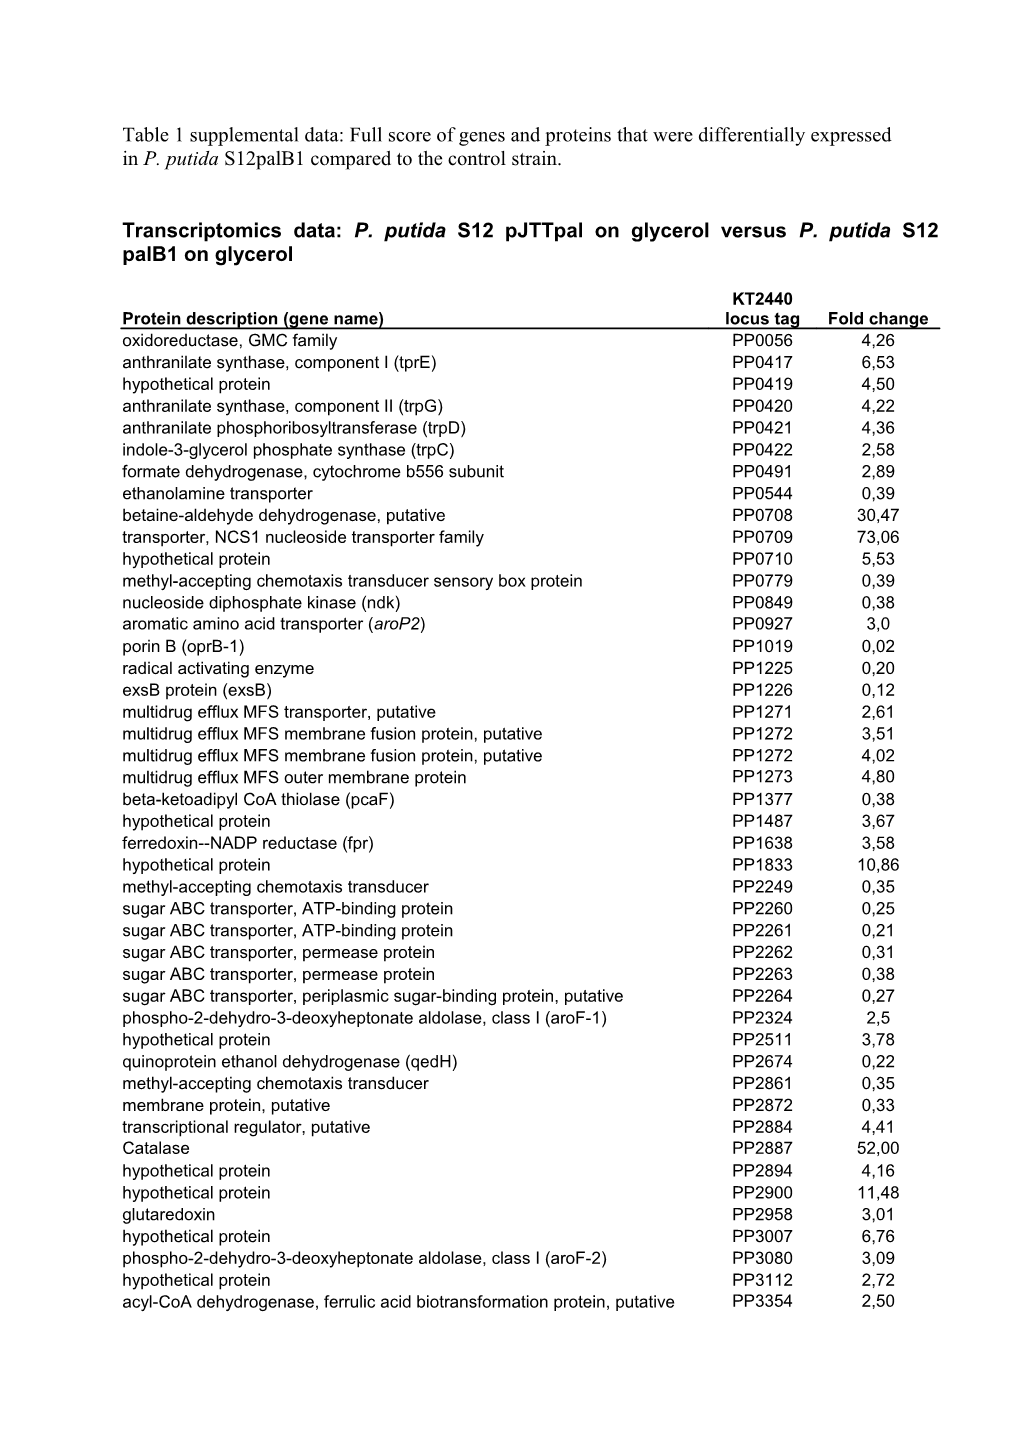 Table 1 Supplemental Data: Full Score of Genes and Proteins That Were Differentially Expressed